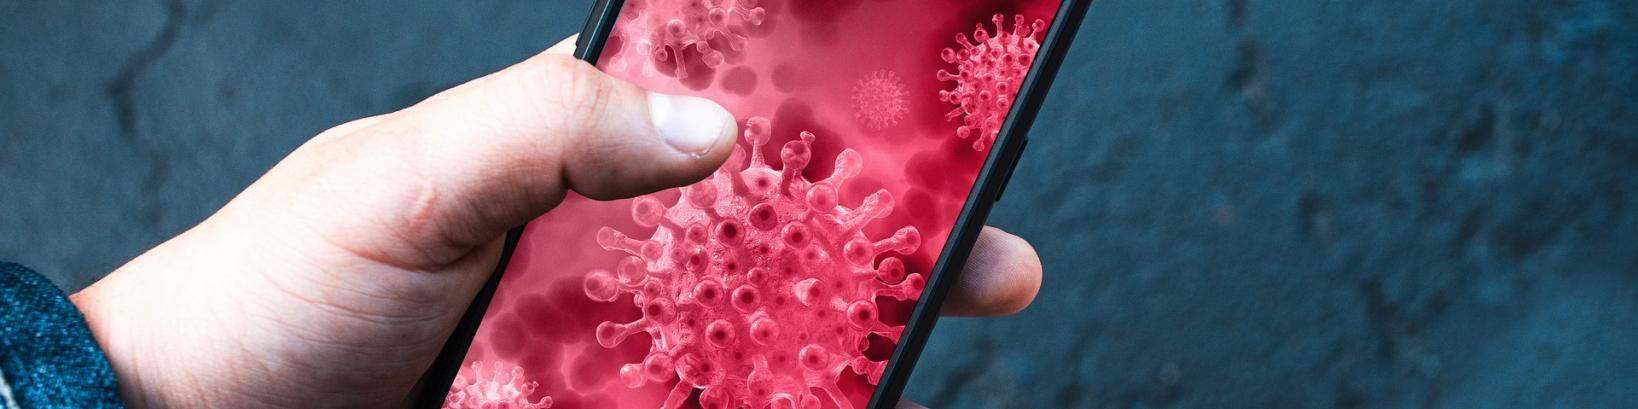 a hand holding a smartphone displaying an image of a virus